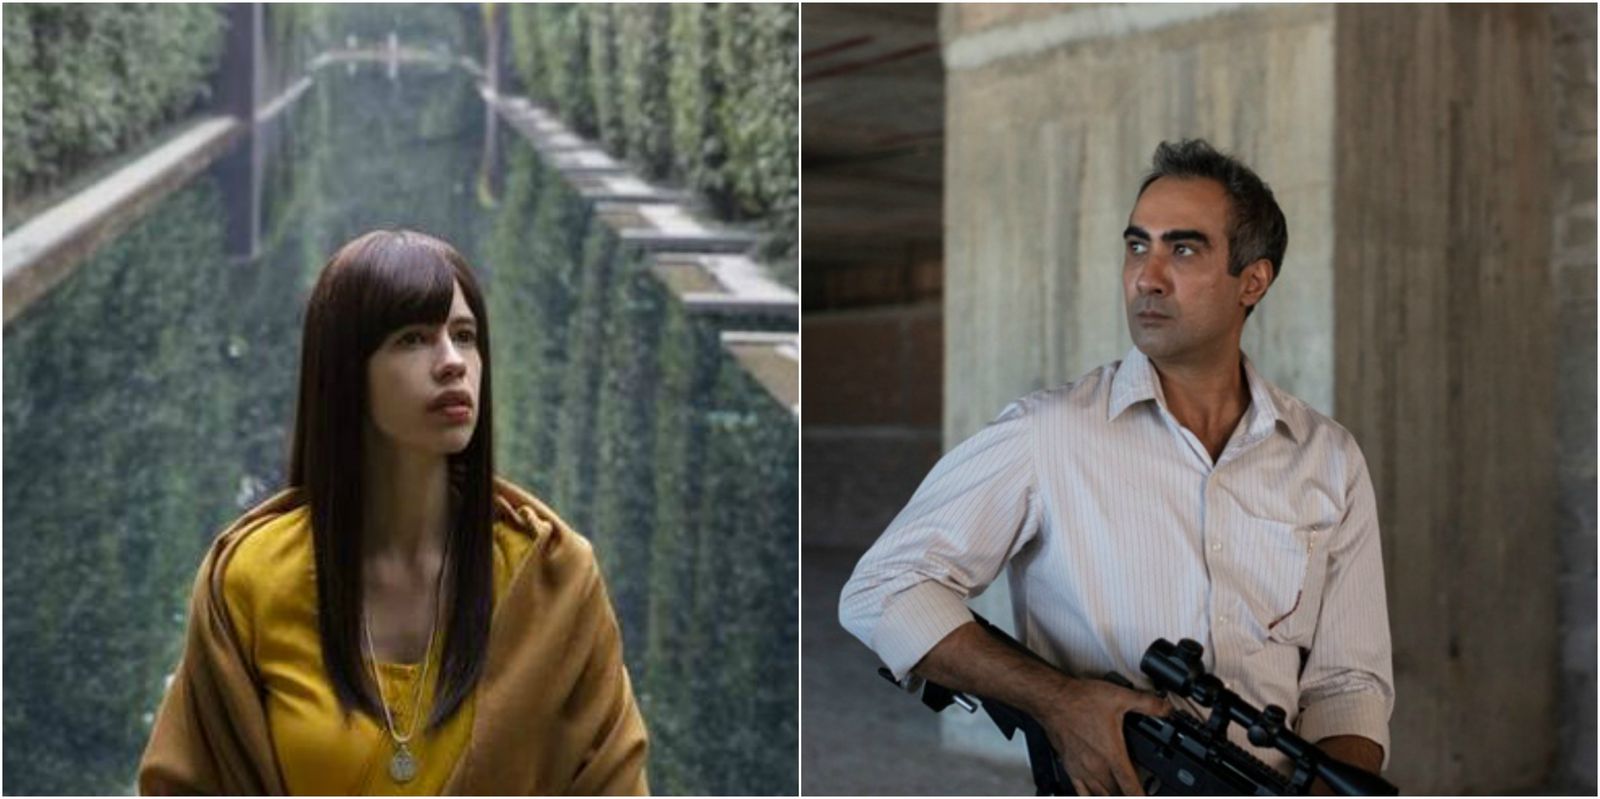 Sacred Games 2: What Roles Are Kalki Koechlin And Ranvir Shorey Playing In The New Season? We Have The Answer